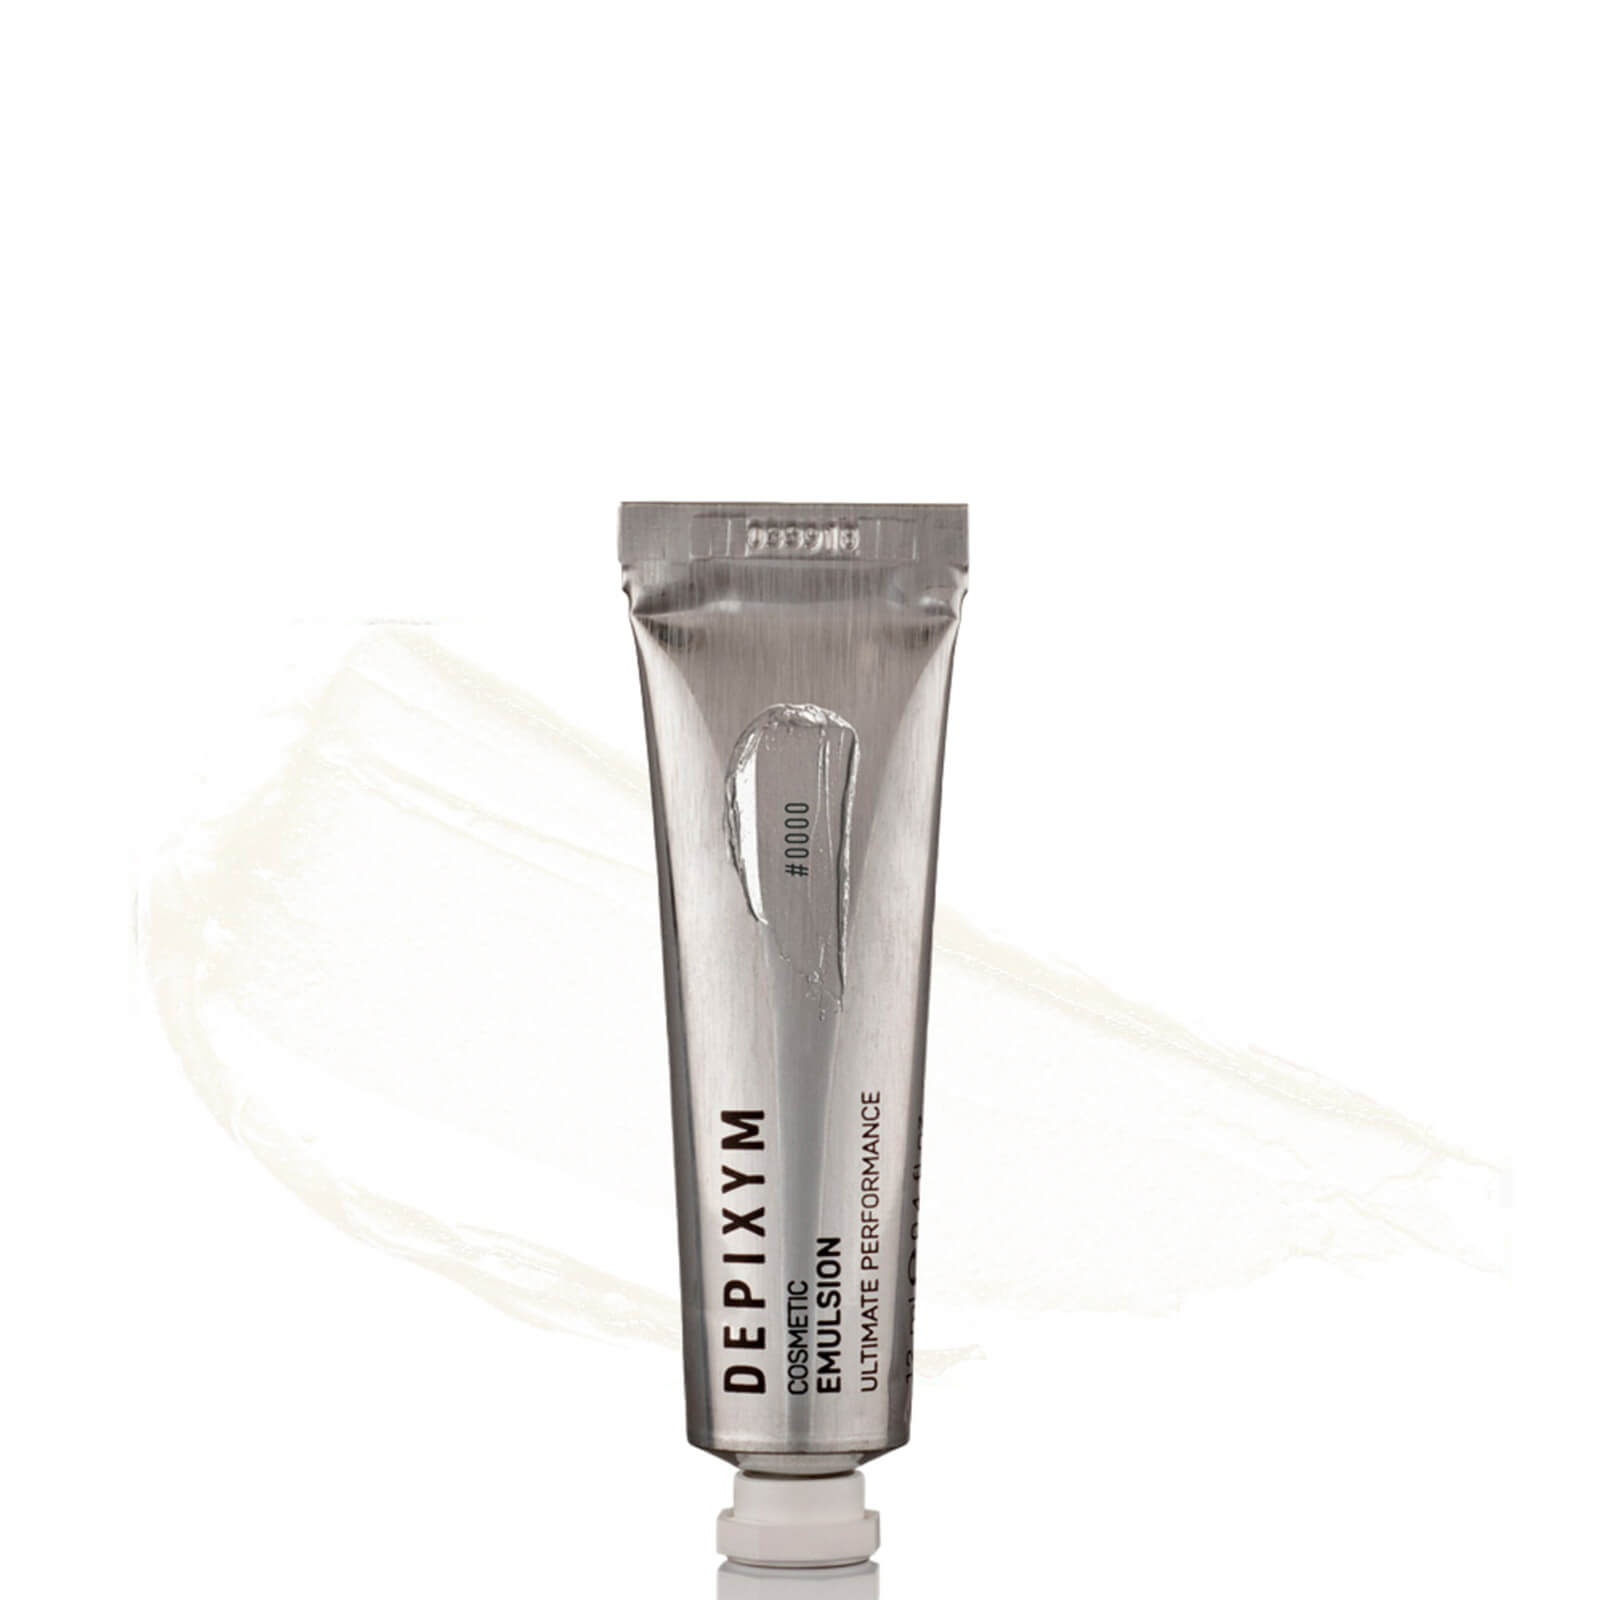 DEPIXYM Cosmetic Emulsion 12ml (Various Shades) - #0000 Clear